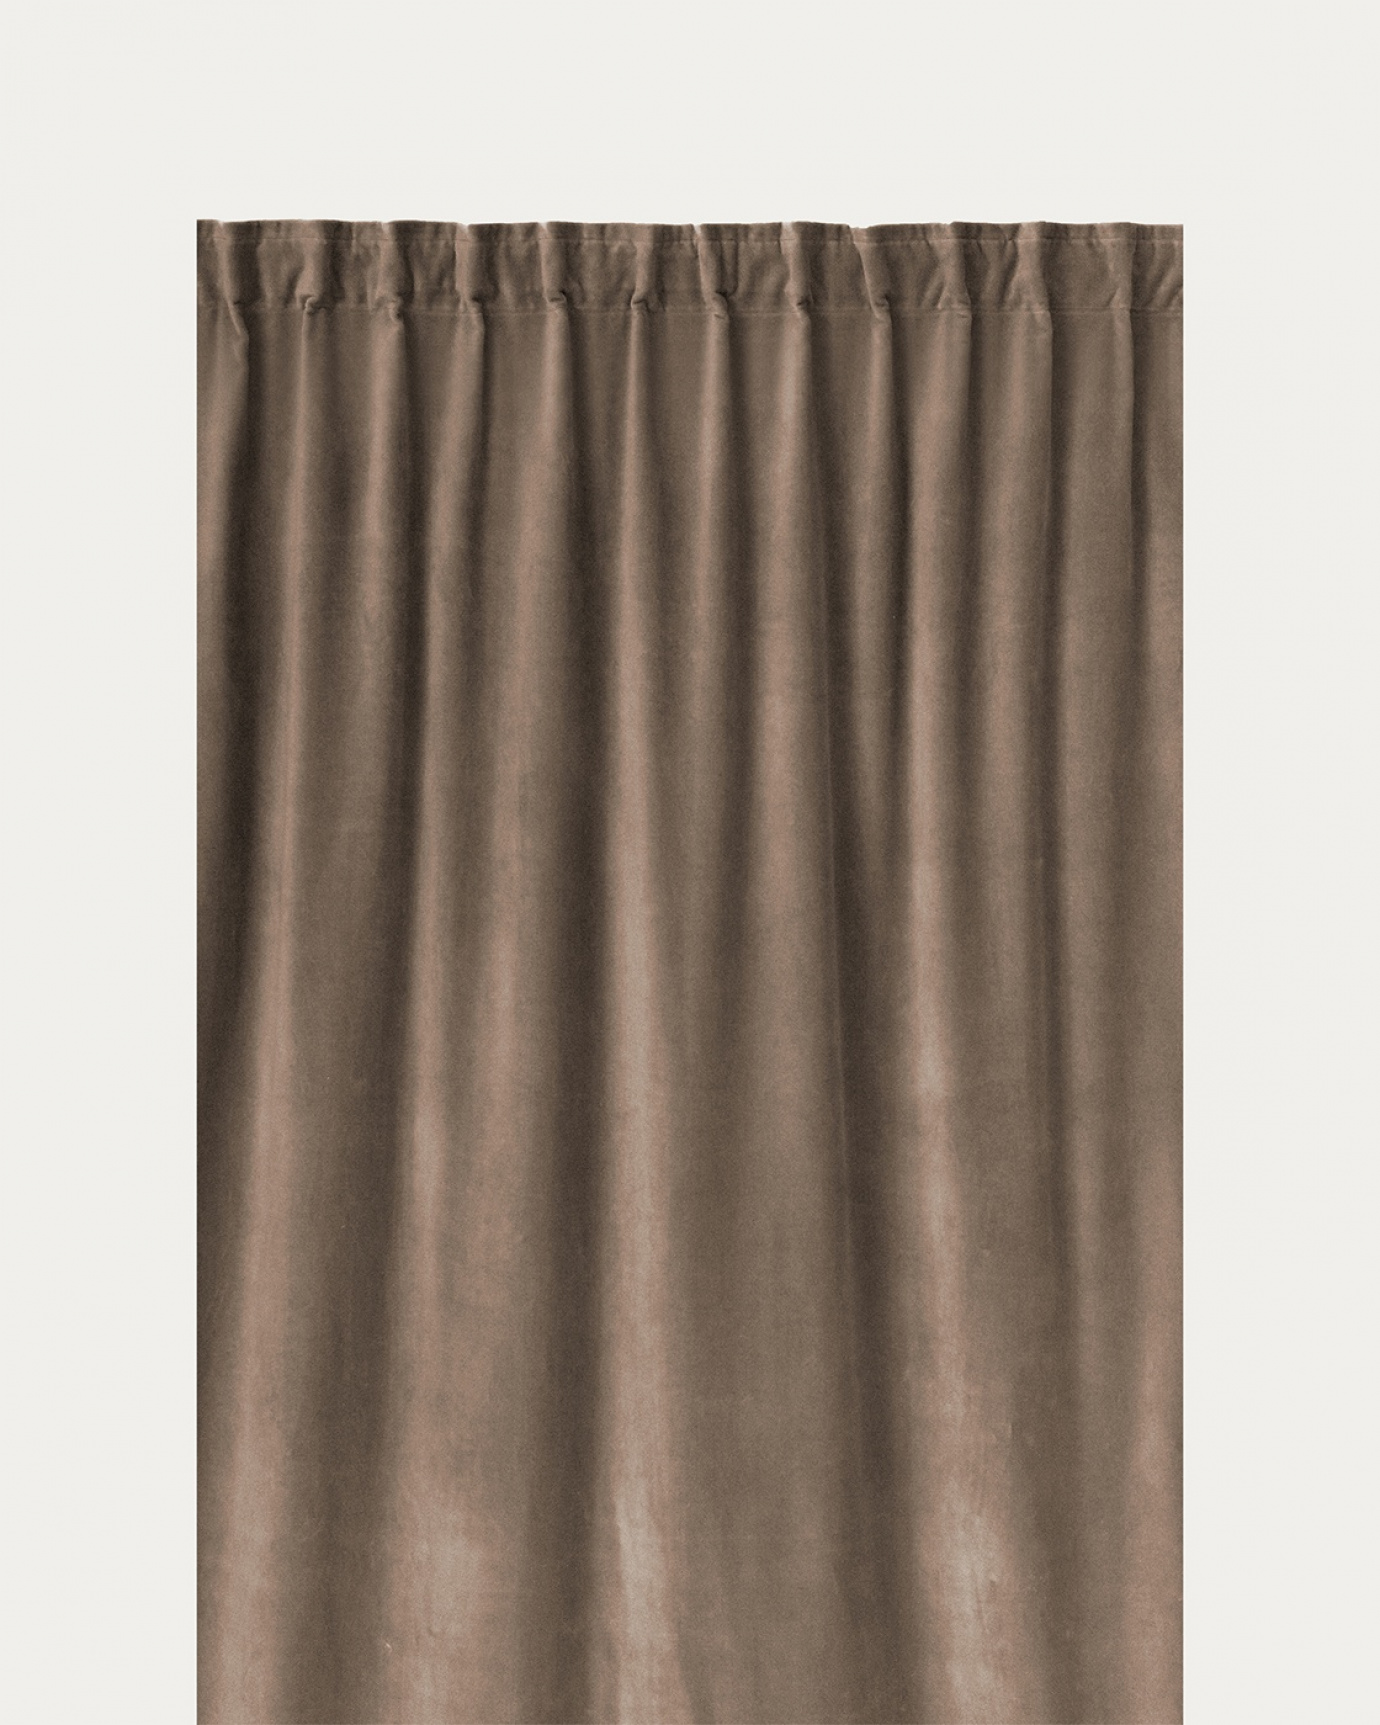 Product image mole brown PAOLO curtain made of cotton velvet with finished pleat tape from LINUM DESIGN. Size 135x290 cm and sold in 2-pack.